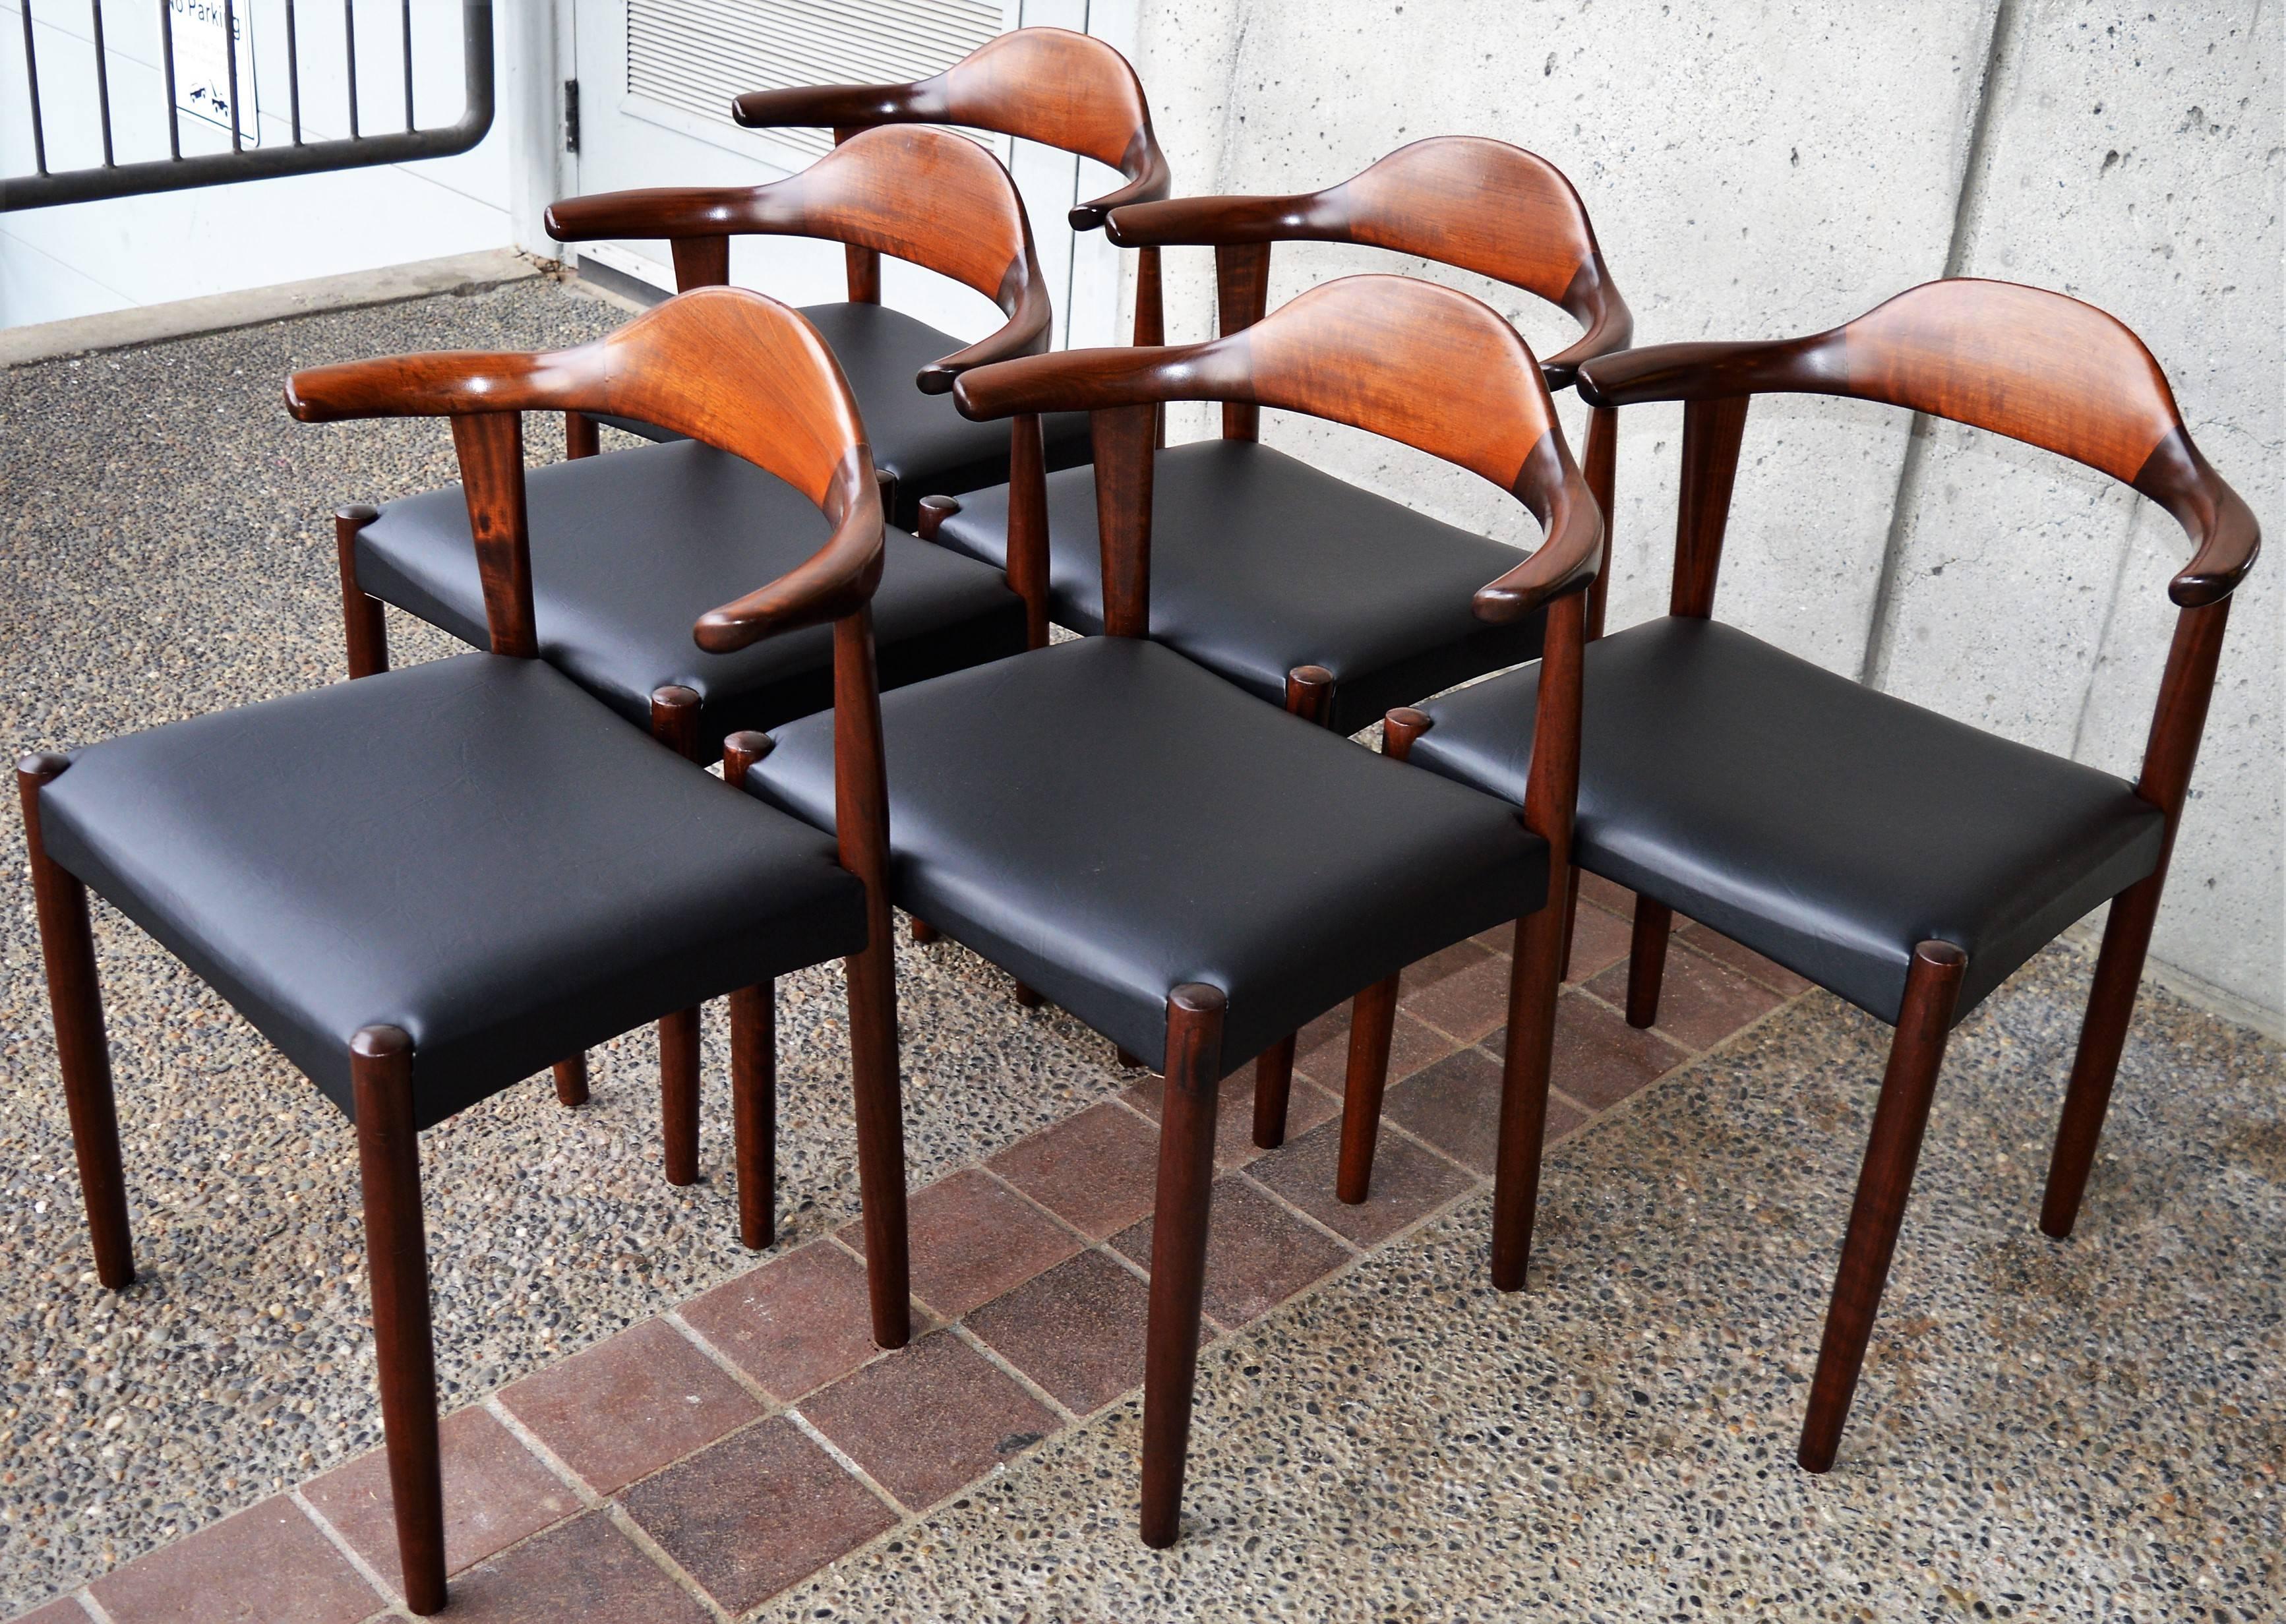 This spectacular set of six Danish Modern rosewood dining chairs with their iconic bull Horn armrests, were designed by Harry Ostergaard for Randers Mobelfabrik in the 1960s. These hand-sculpted chairs closely resemble the acclaimed Hans Wegner bull